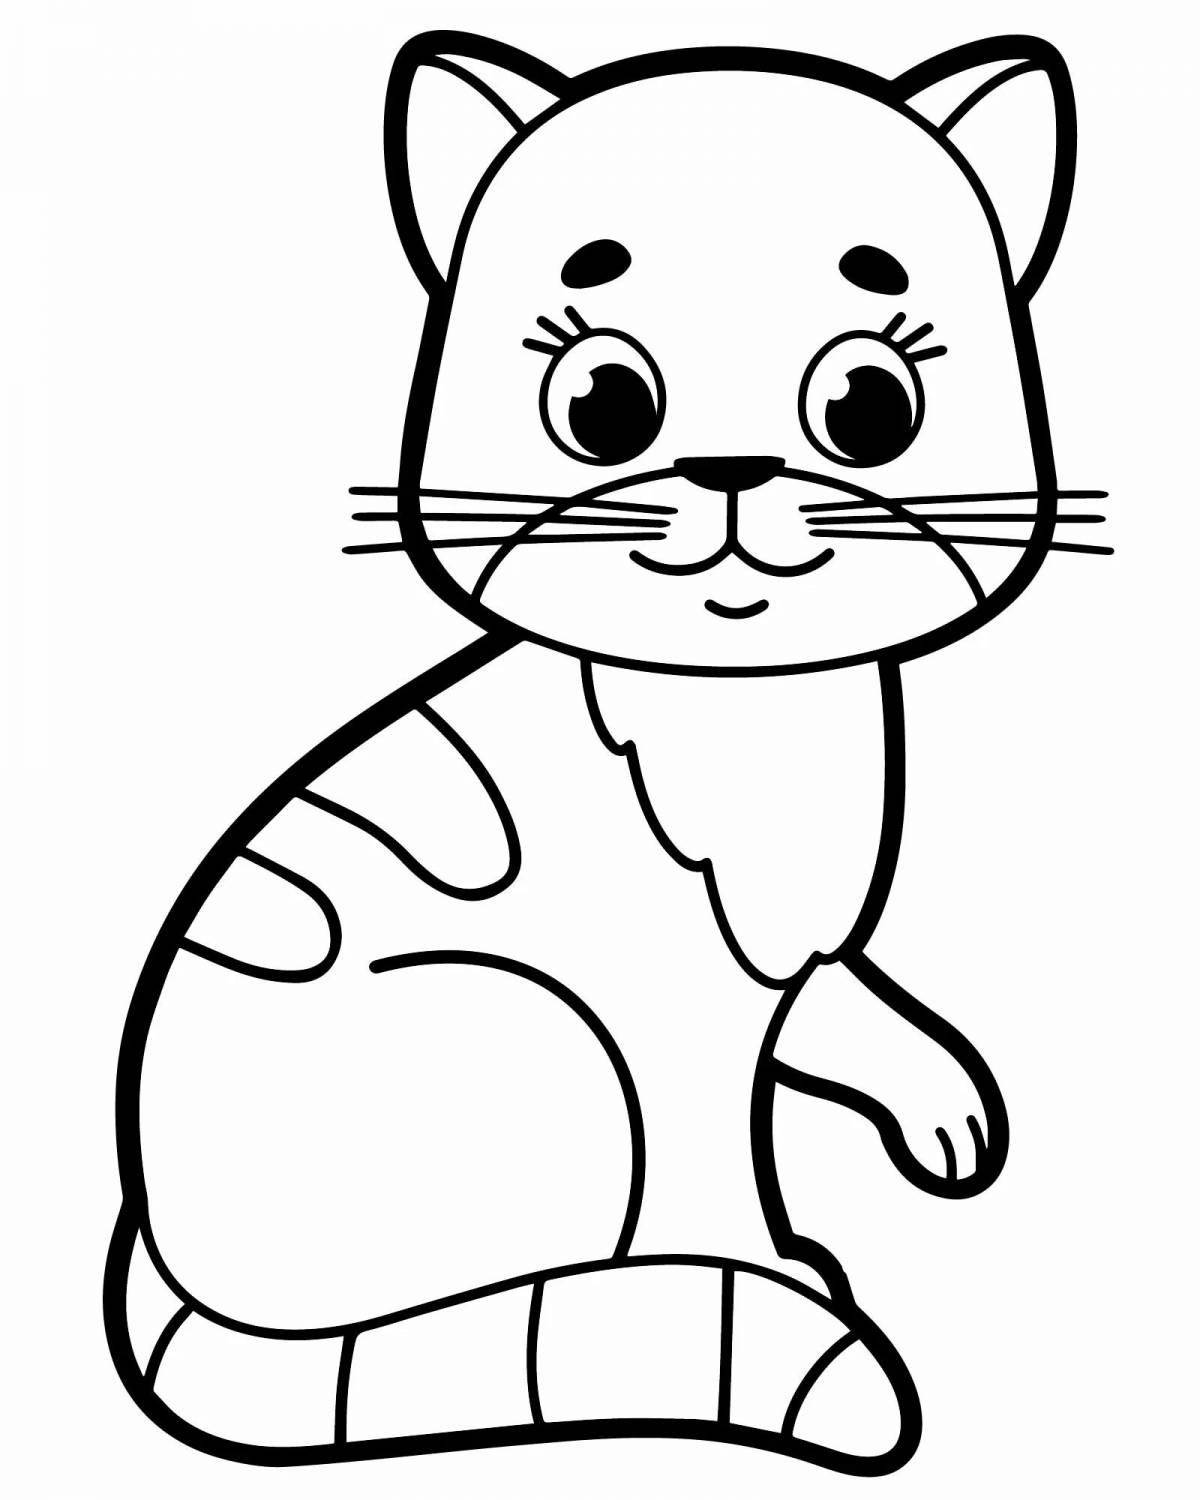 Adorable kitty coloring book for 2-3 year olds